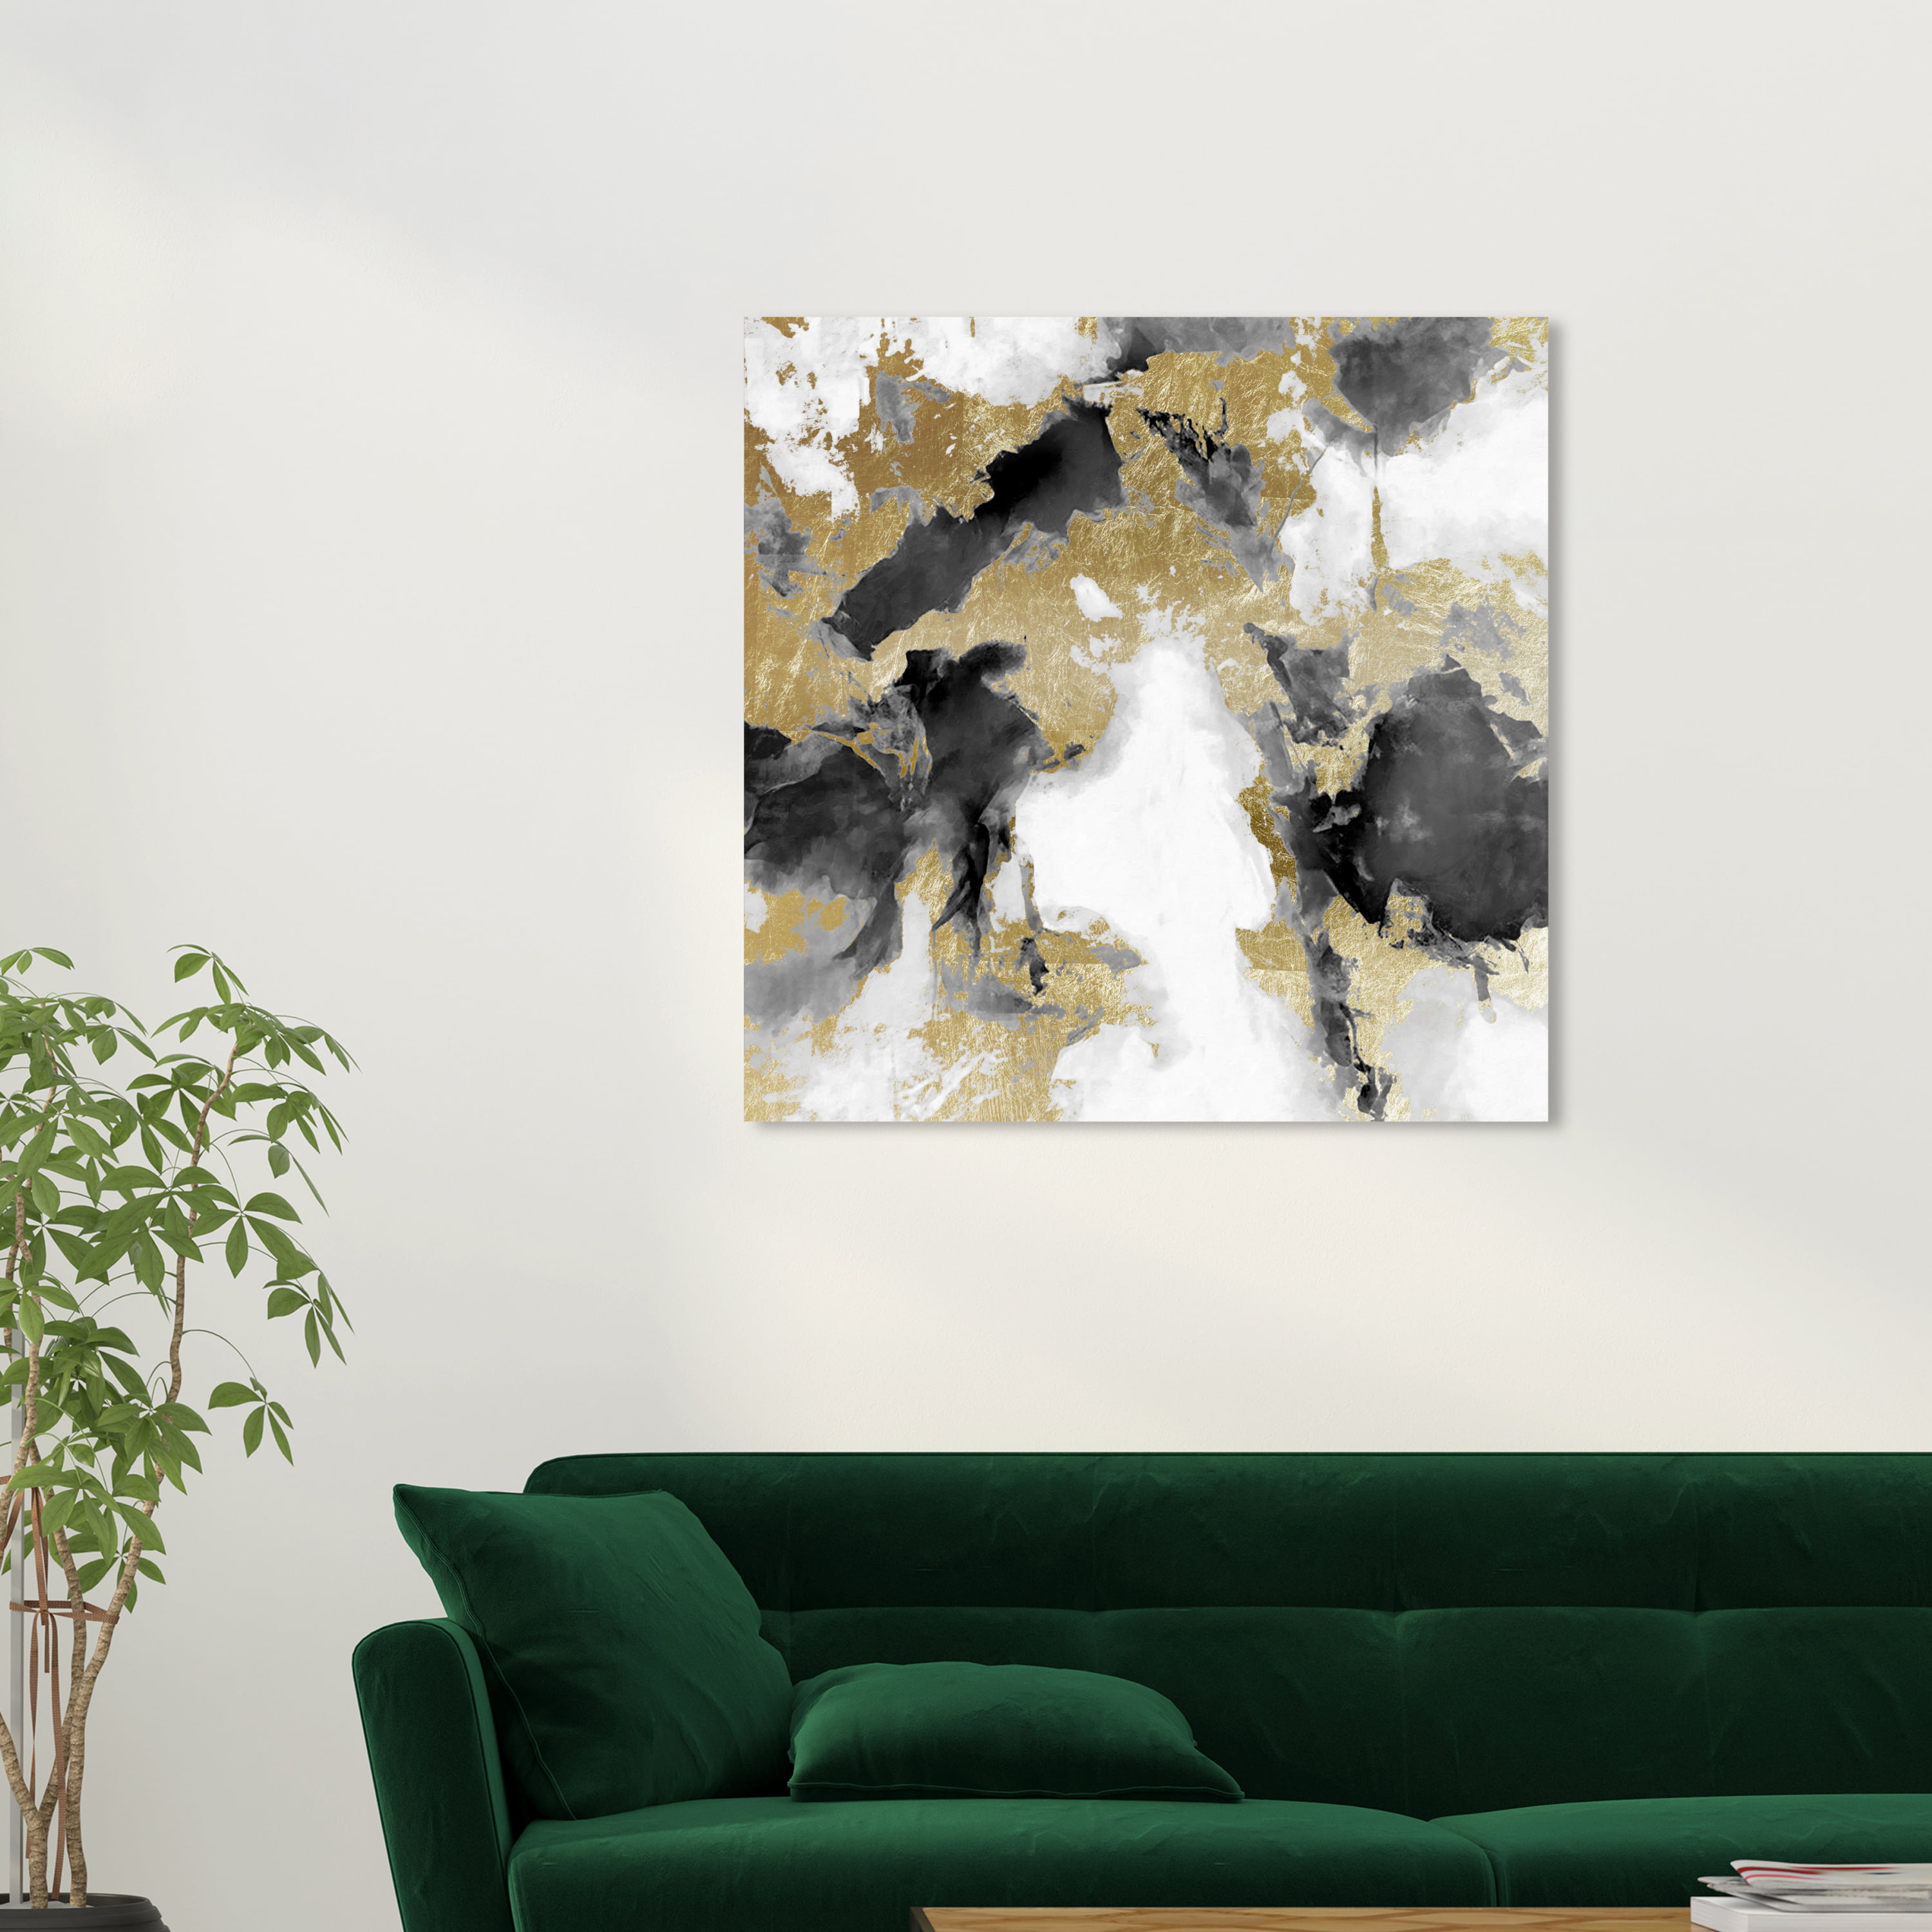 Wynwood Studio Fashion and Glam Wall Art Canvas Prints 'Articles de Voyage Gold Leaf' Home Dcor, 30 x 45, Gold, White